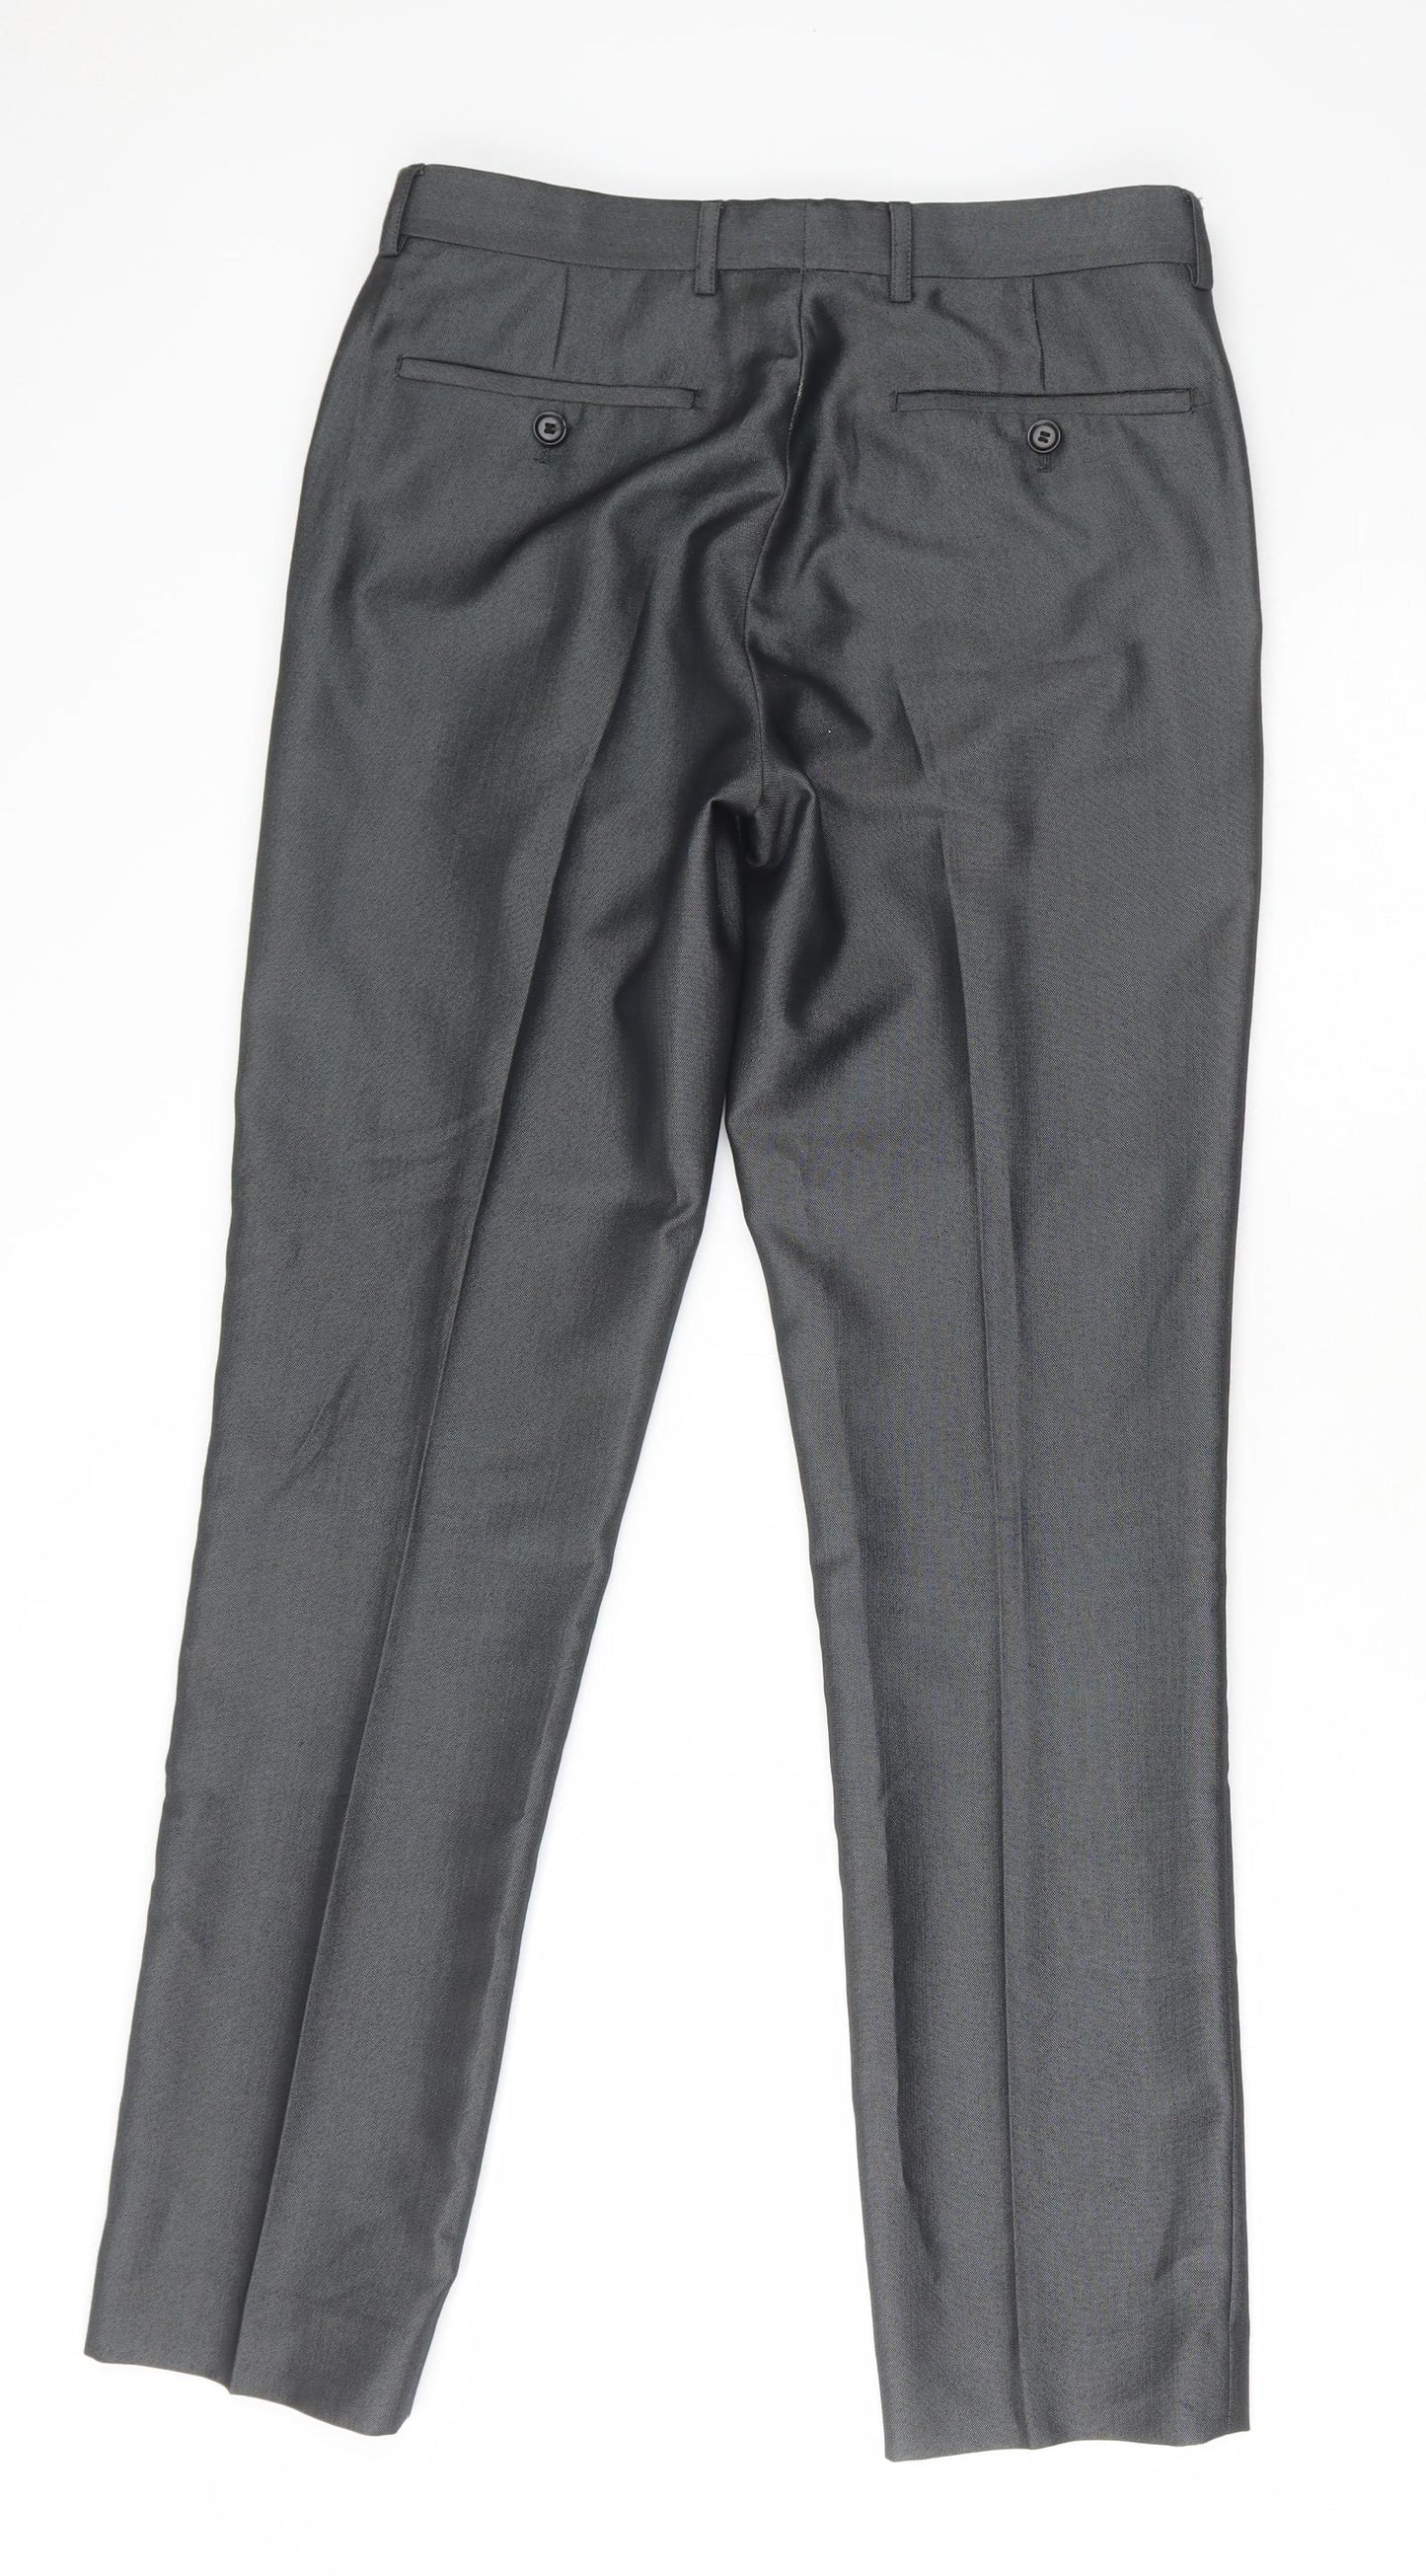 Ventuno Mens Grey Polyester Trousers Size 30 in L31 in Regular